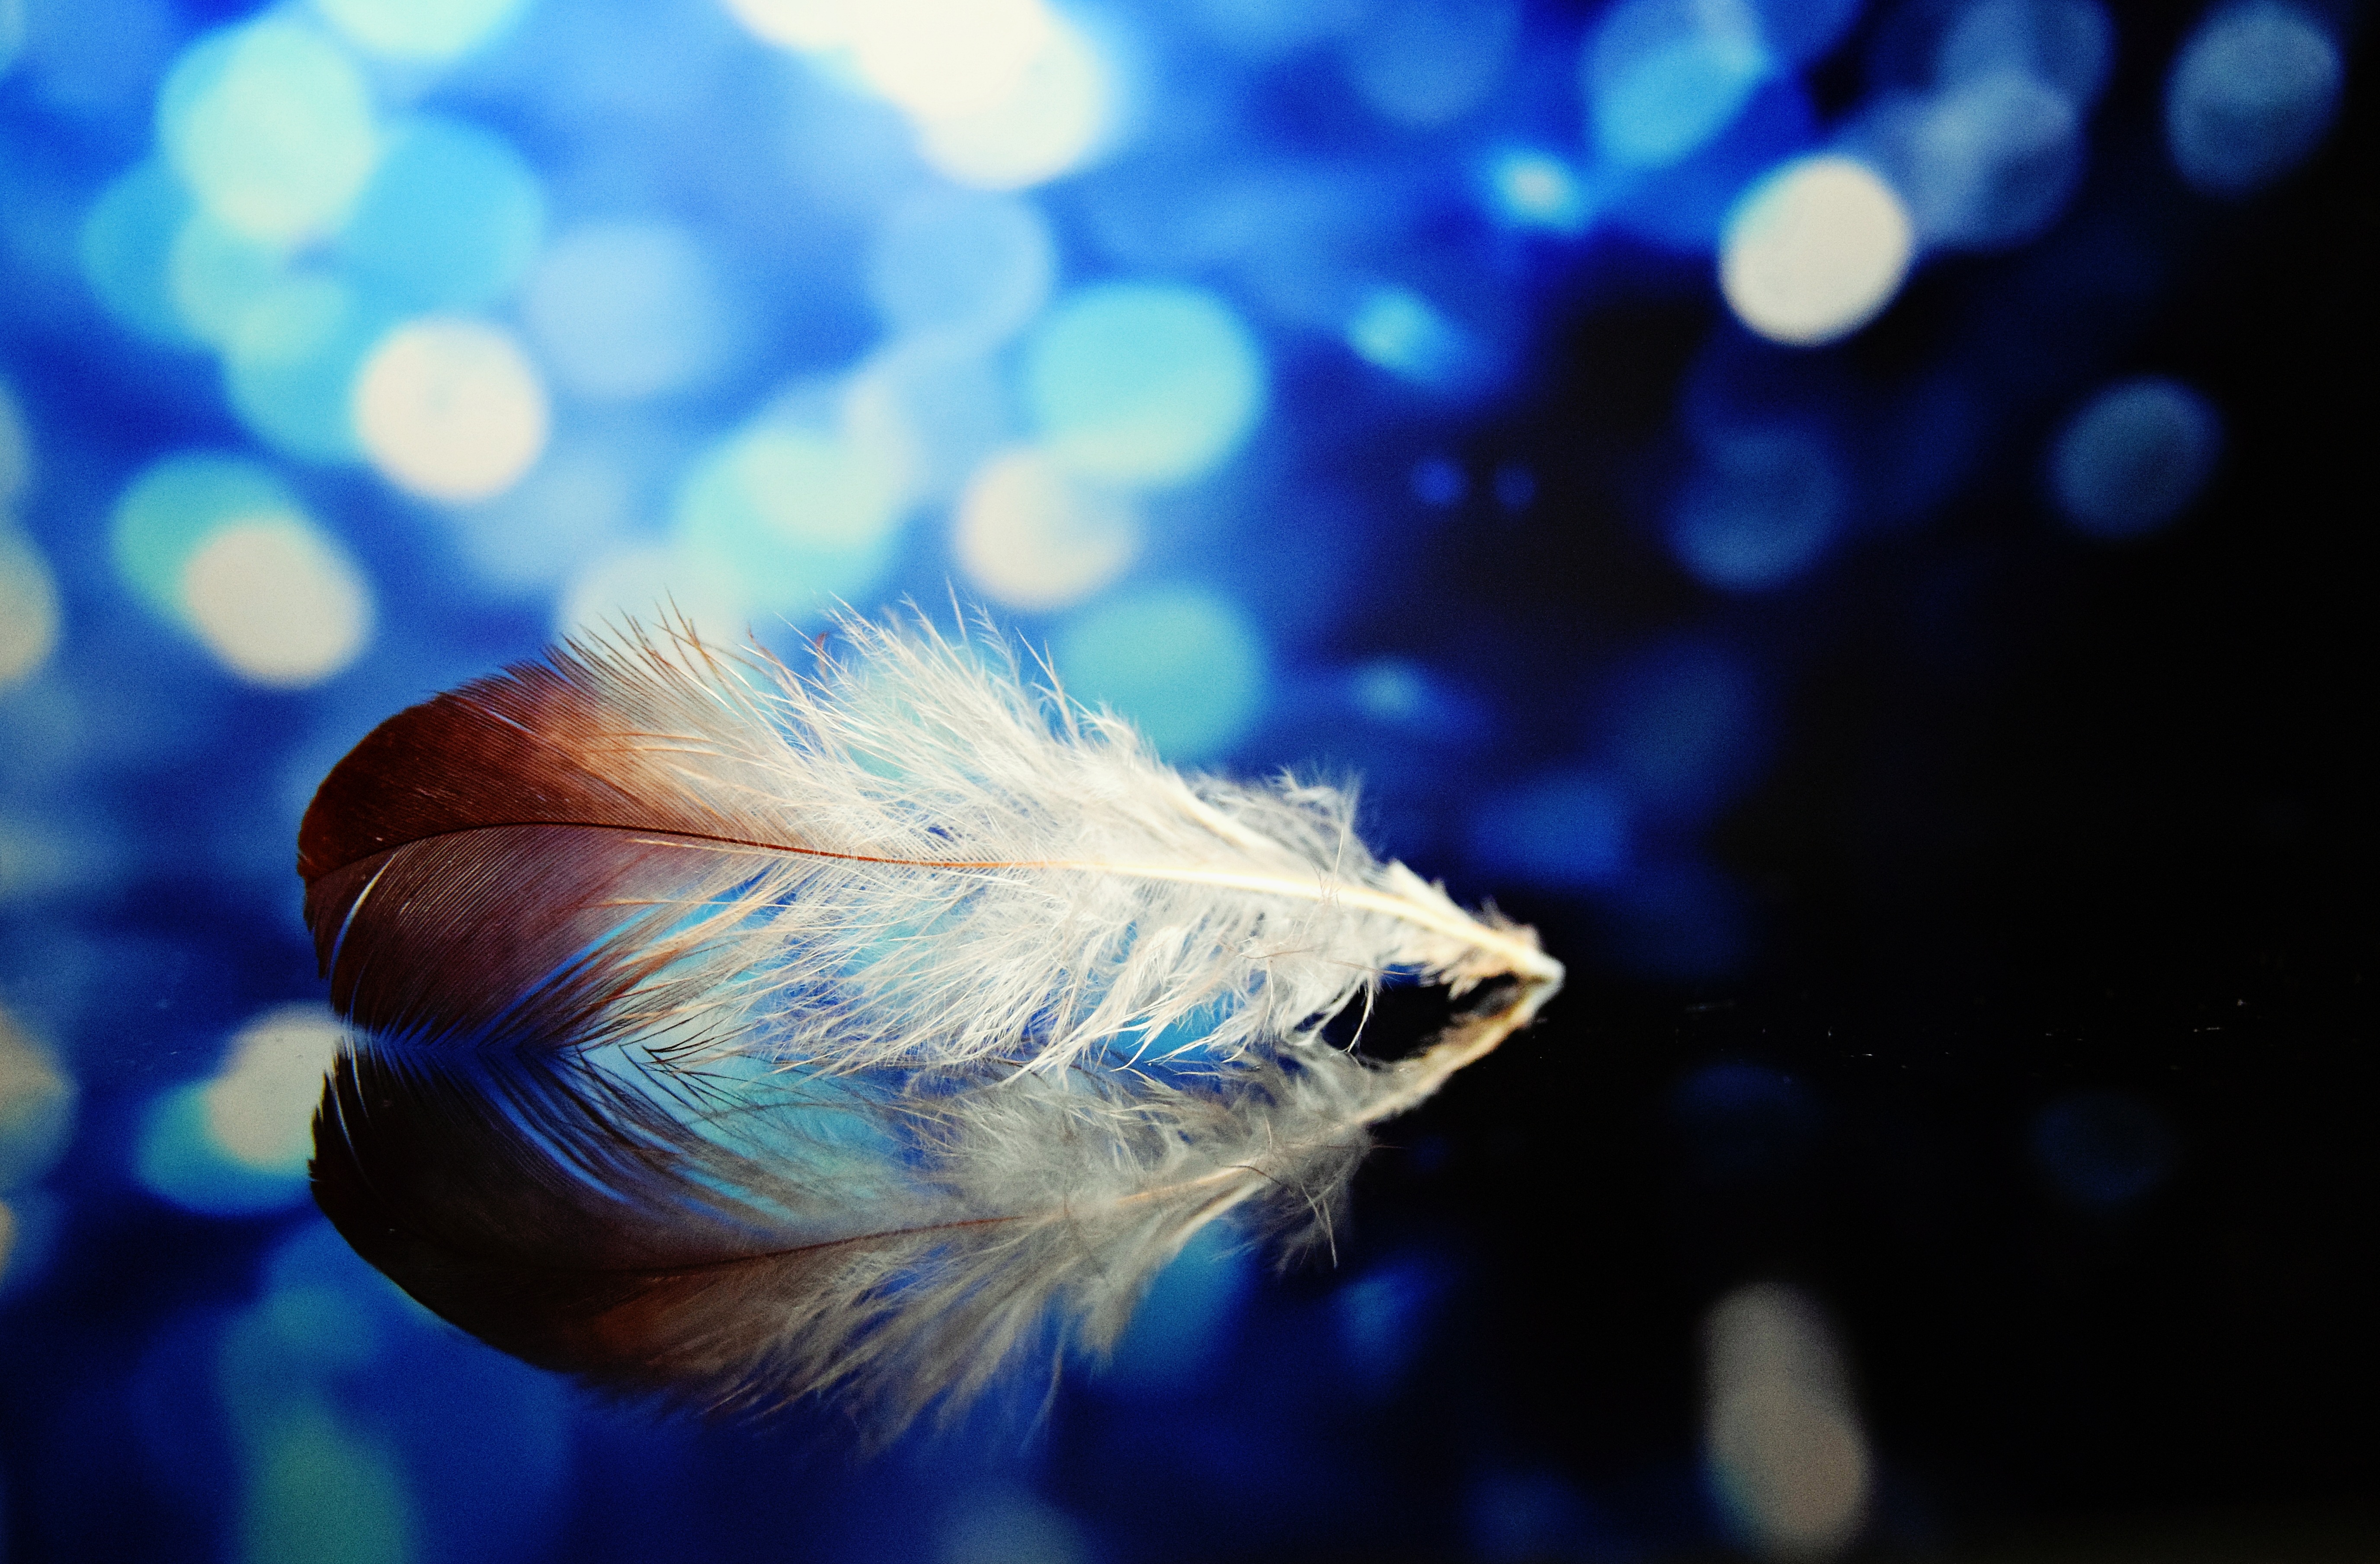 51523 download wallpaper feather, glare, miscellanea, miscellaneous, close-up, pen screensavers and pictures for free